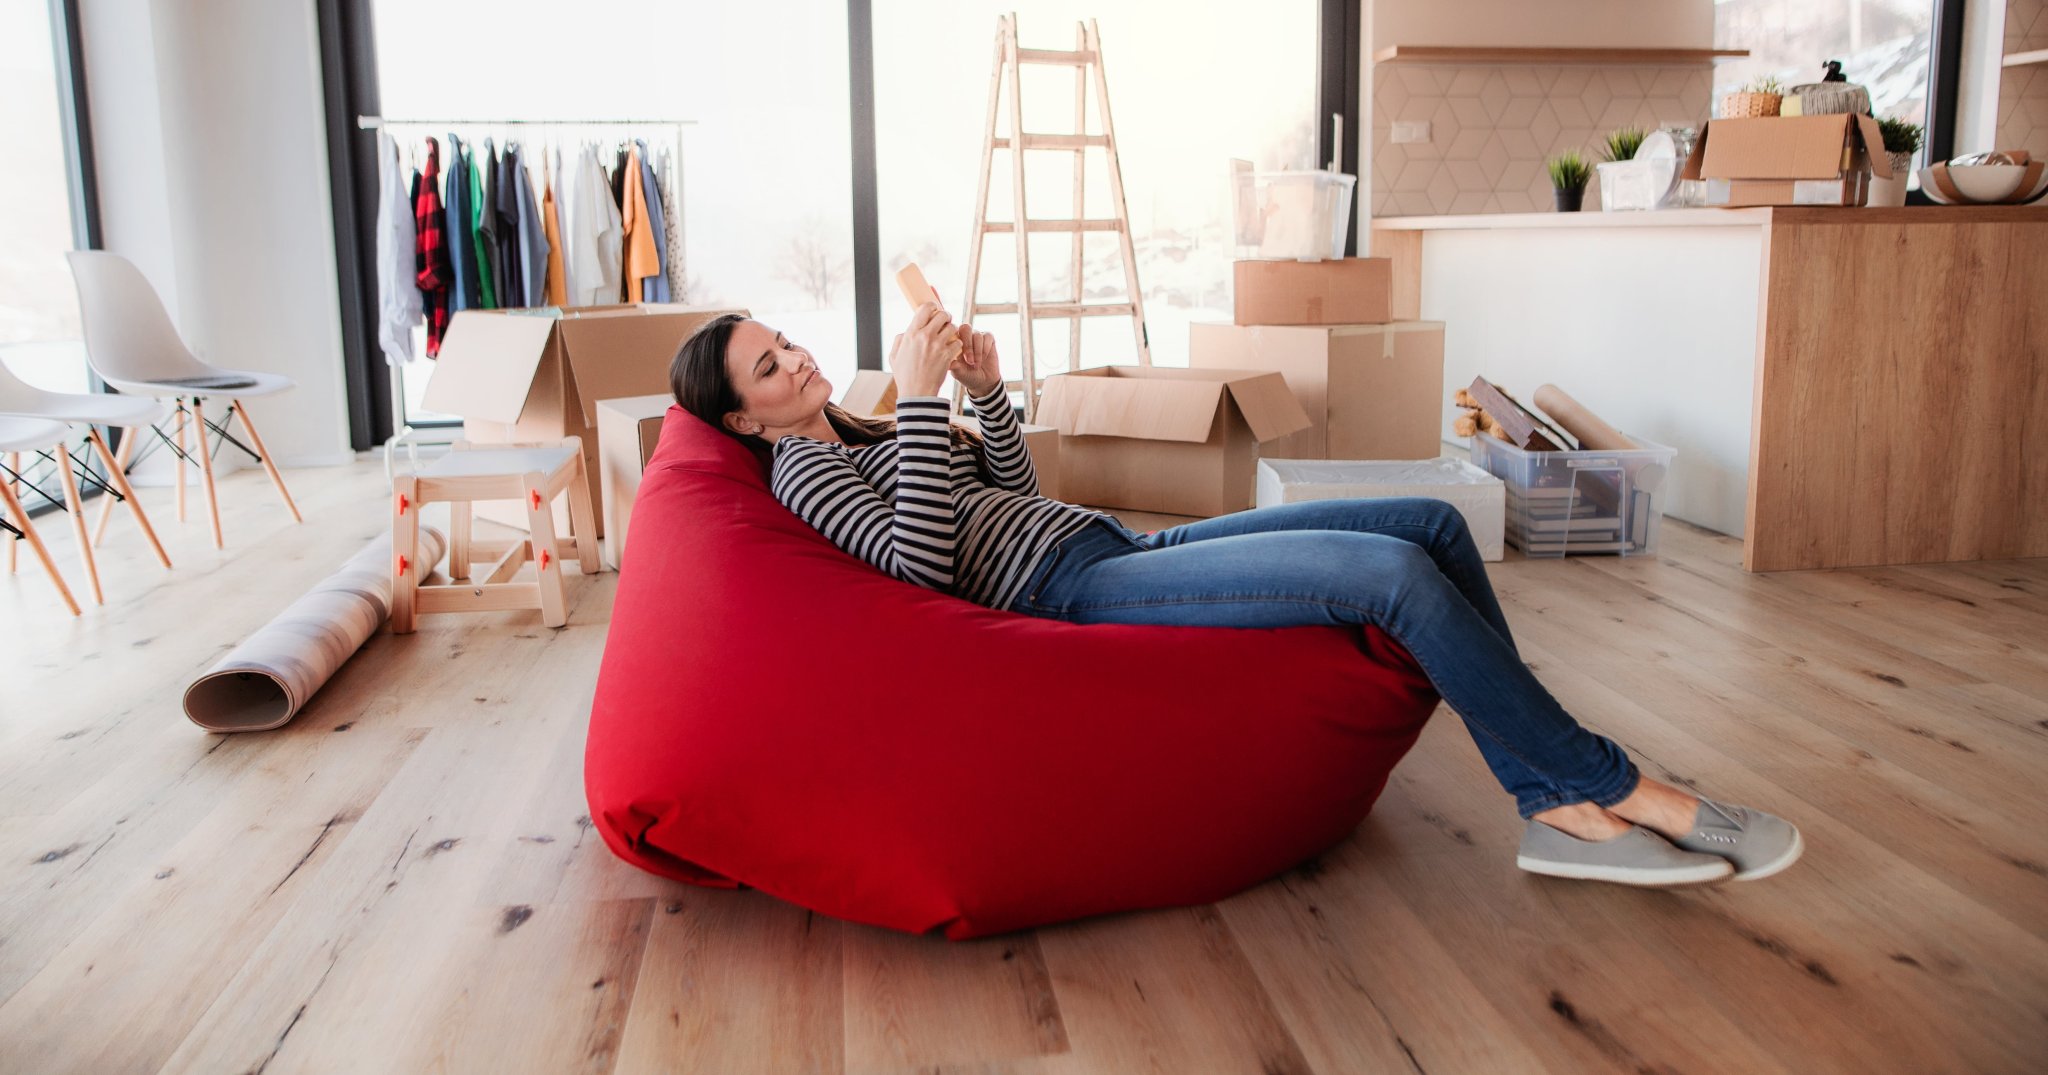 This Ultracomfy Amazon Bean Bag Is on Sale Today Only, and We're Ready to Nap in It!